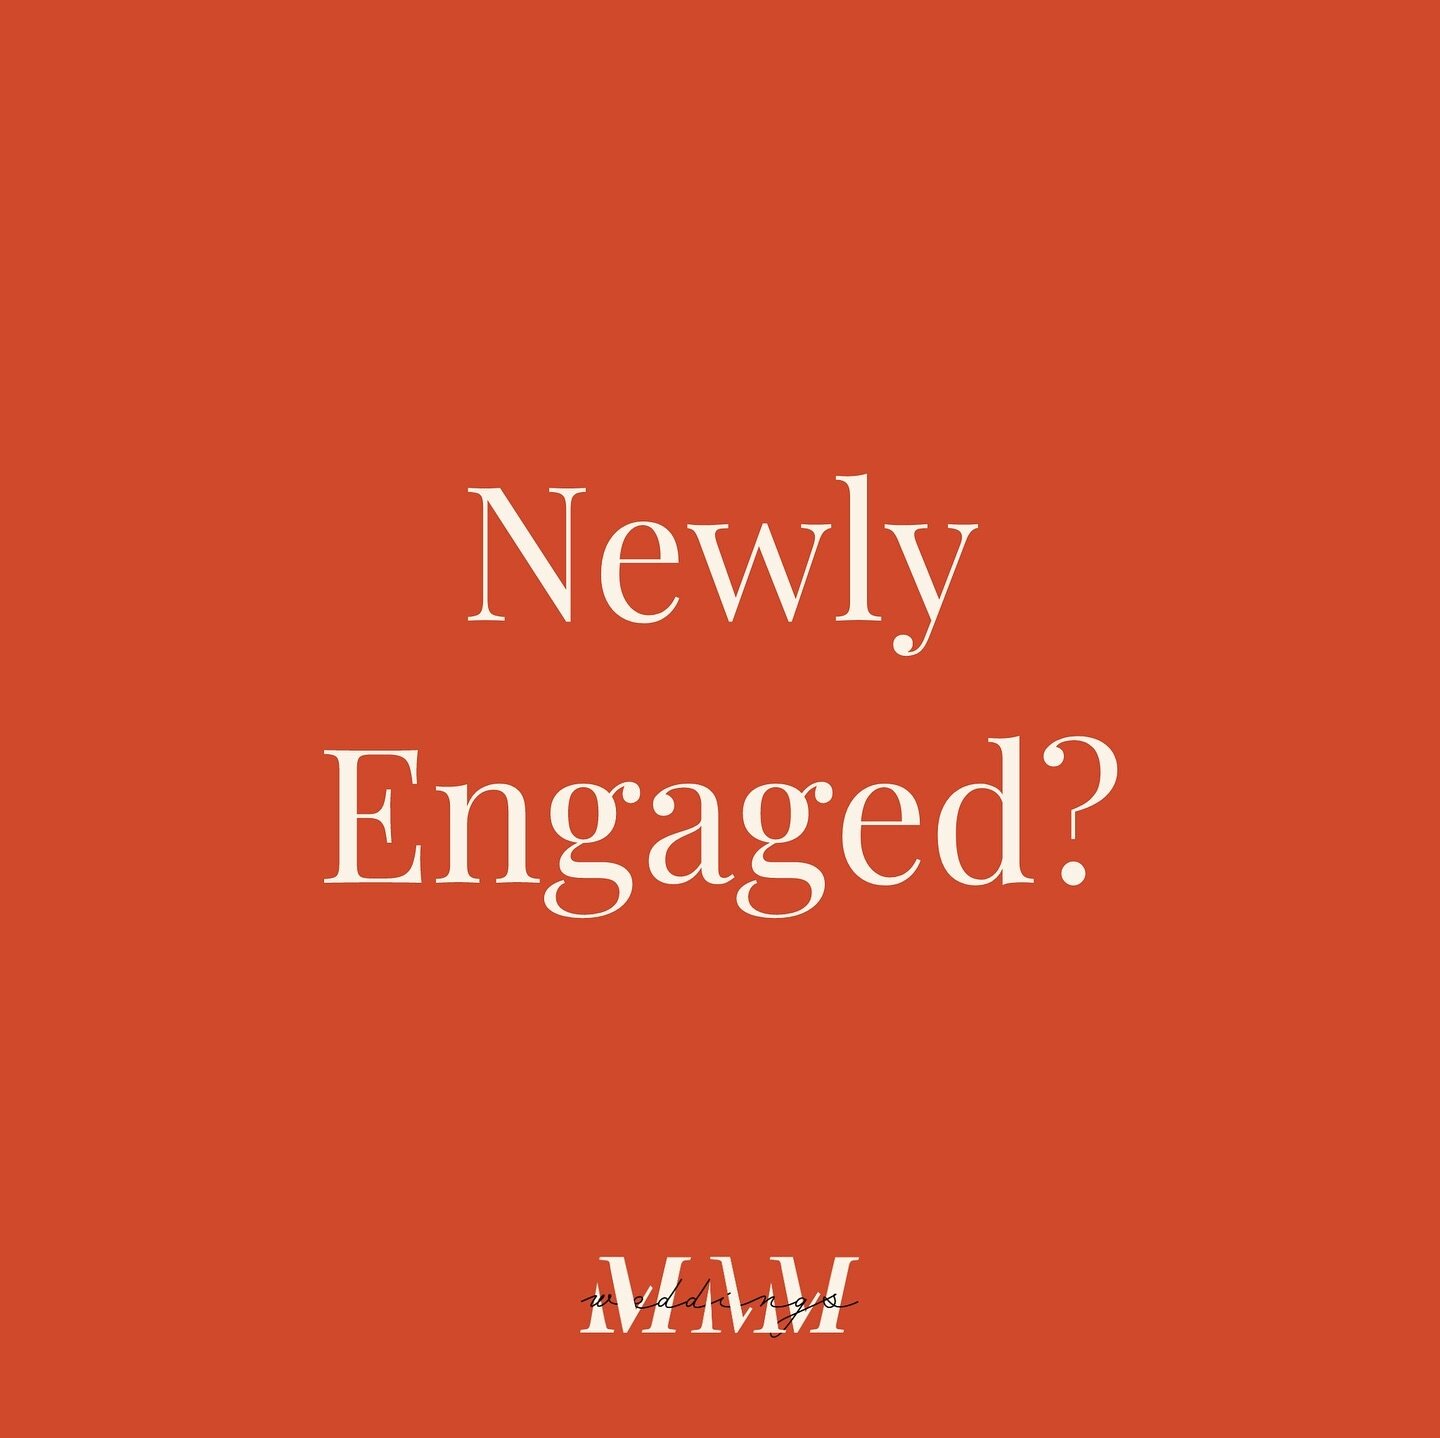 Are you newly engaged and currently in a love bubble? Or know anyone who is? Congratulations fianc&eacute;!! Our wedding consultation package is perfect for couples not sure where to start! Let me find you your dream team of suppliers that suit your 